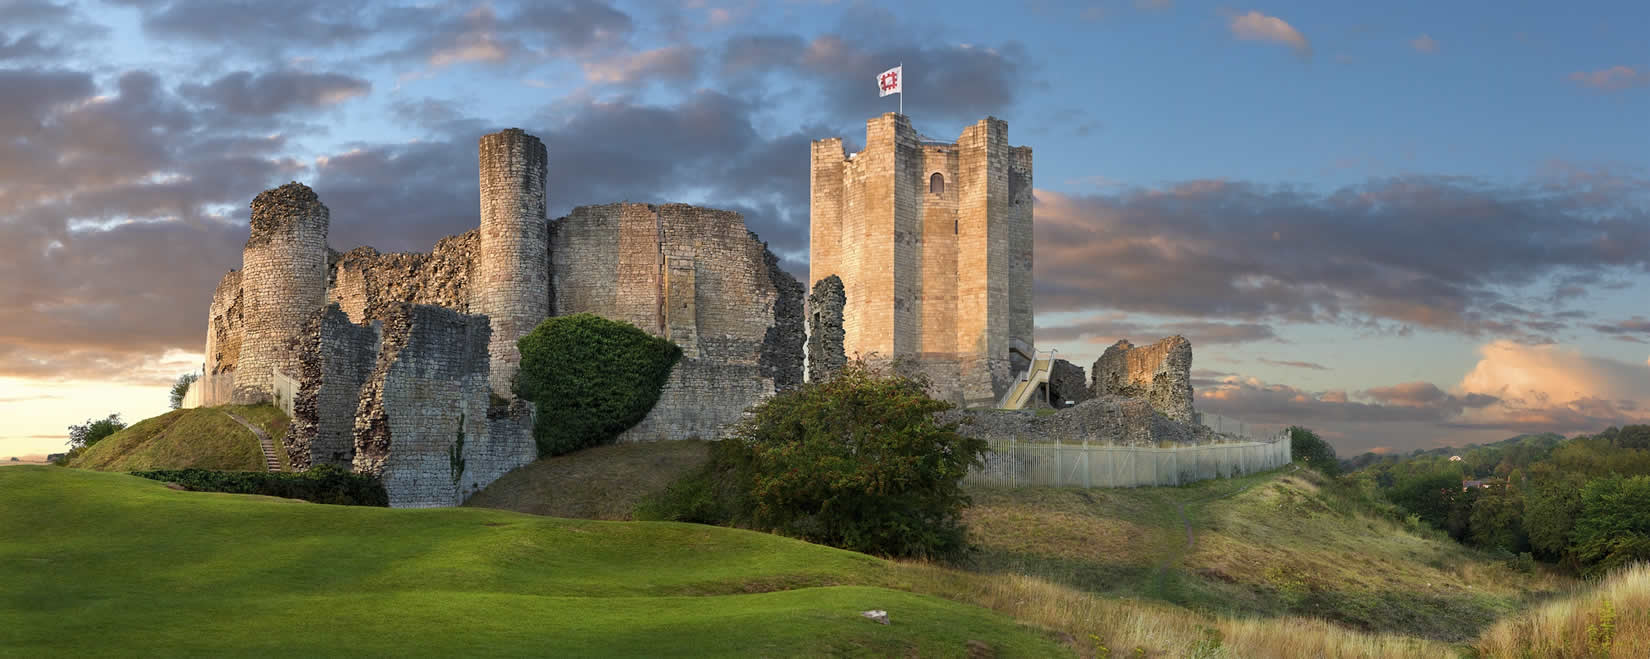 Image name Conisbrough Castle the 29 image from the post Visitor Attractions in Yorkshire.com.